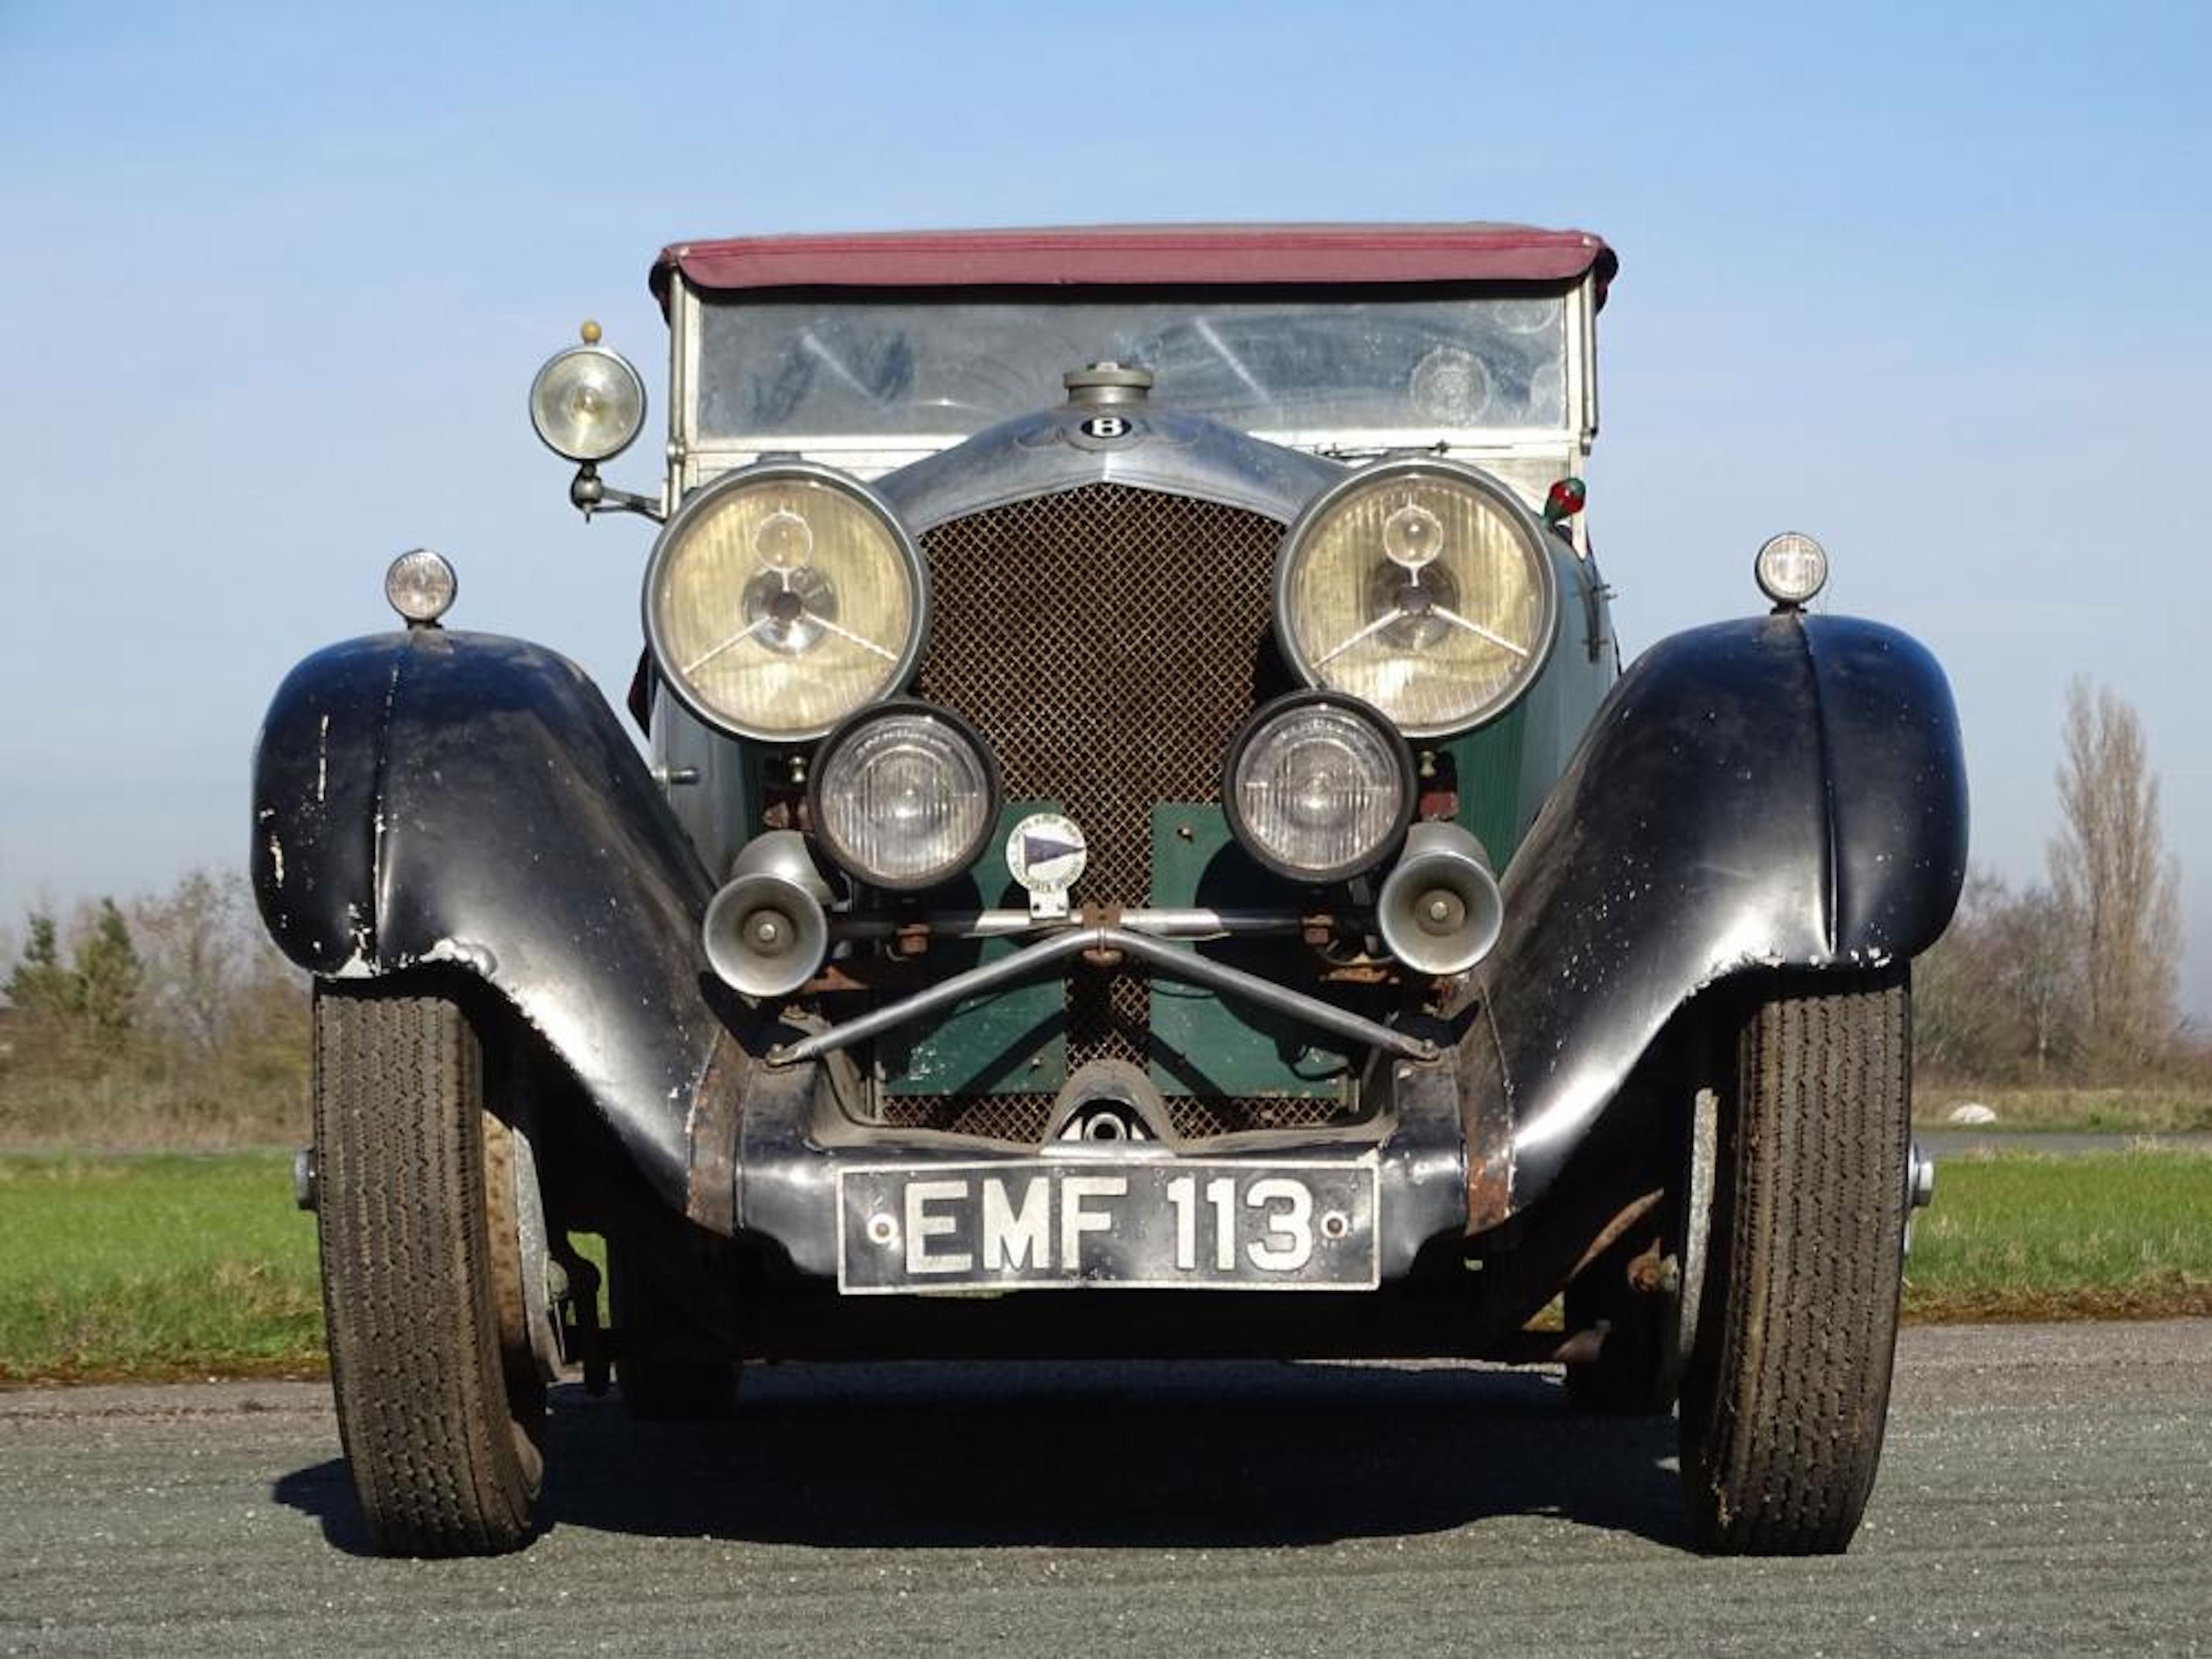 1936 Bentley, NOS 1936 Bentley tourer heading to auction in England, ClassicCars.com Journal